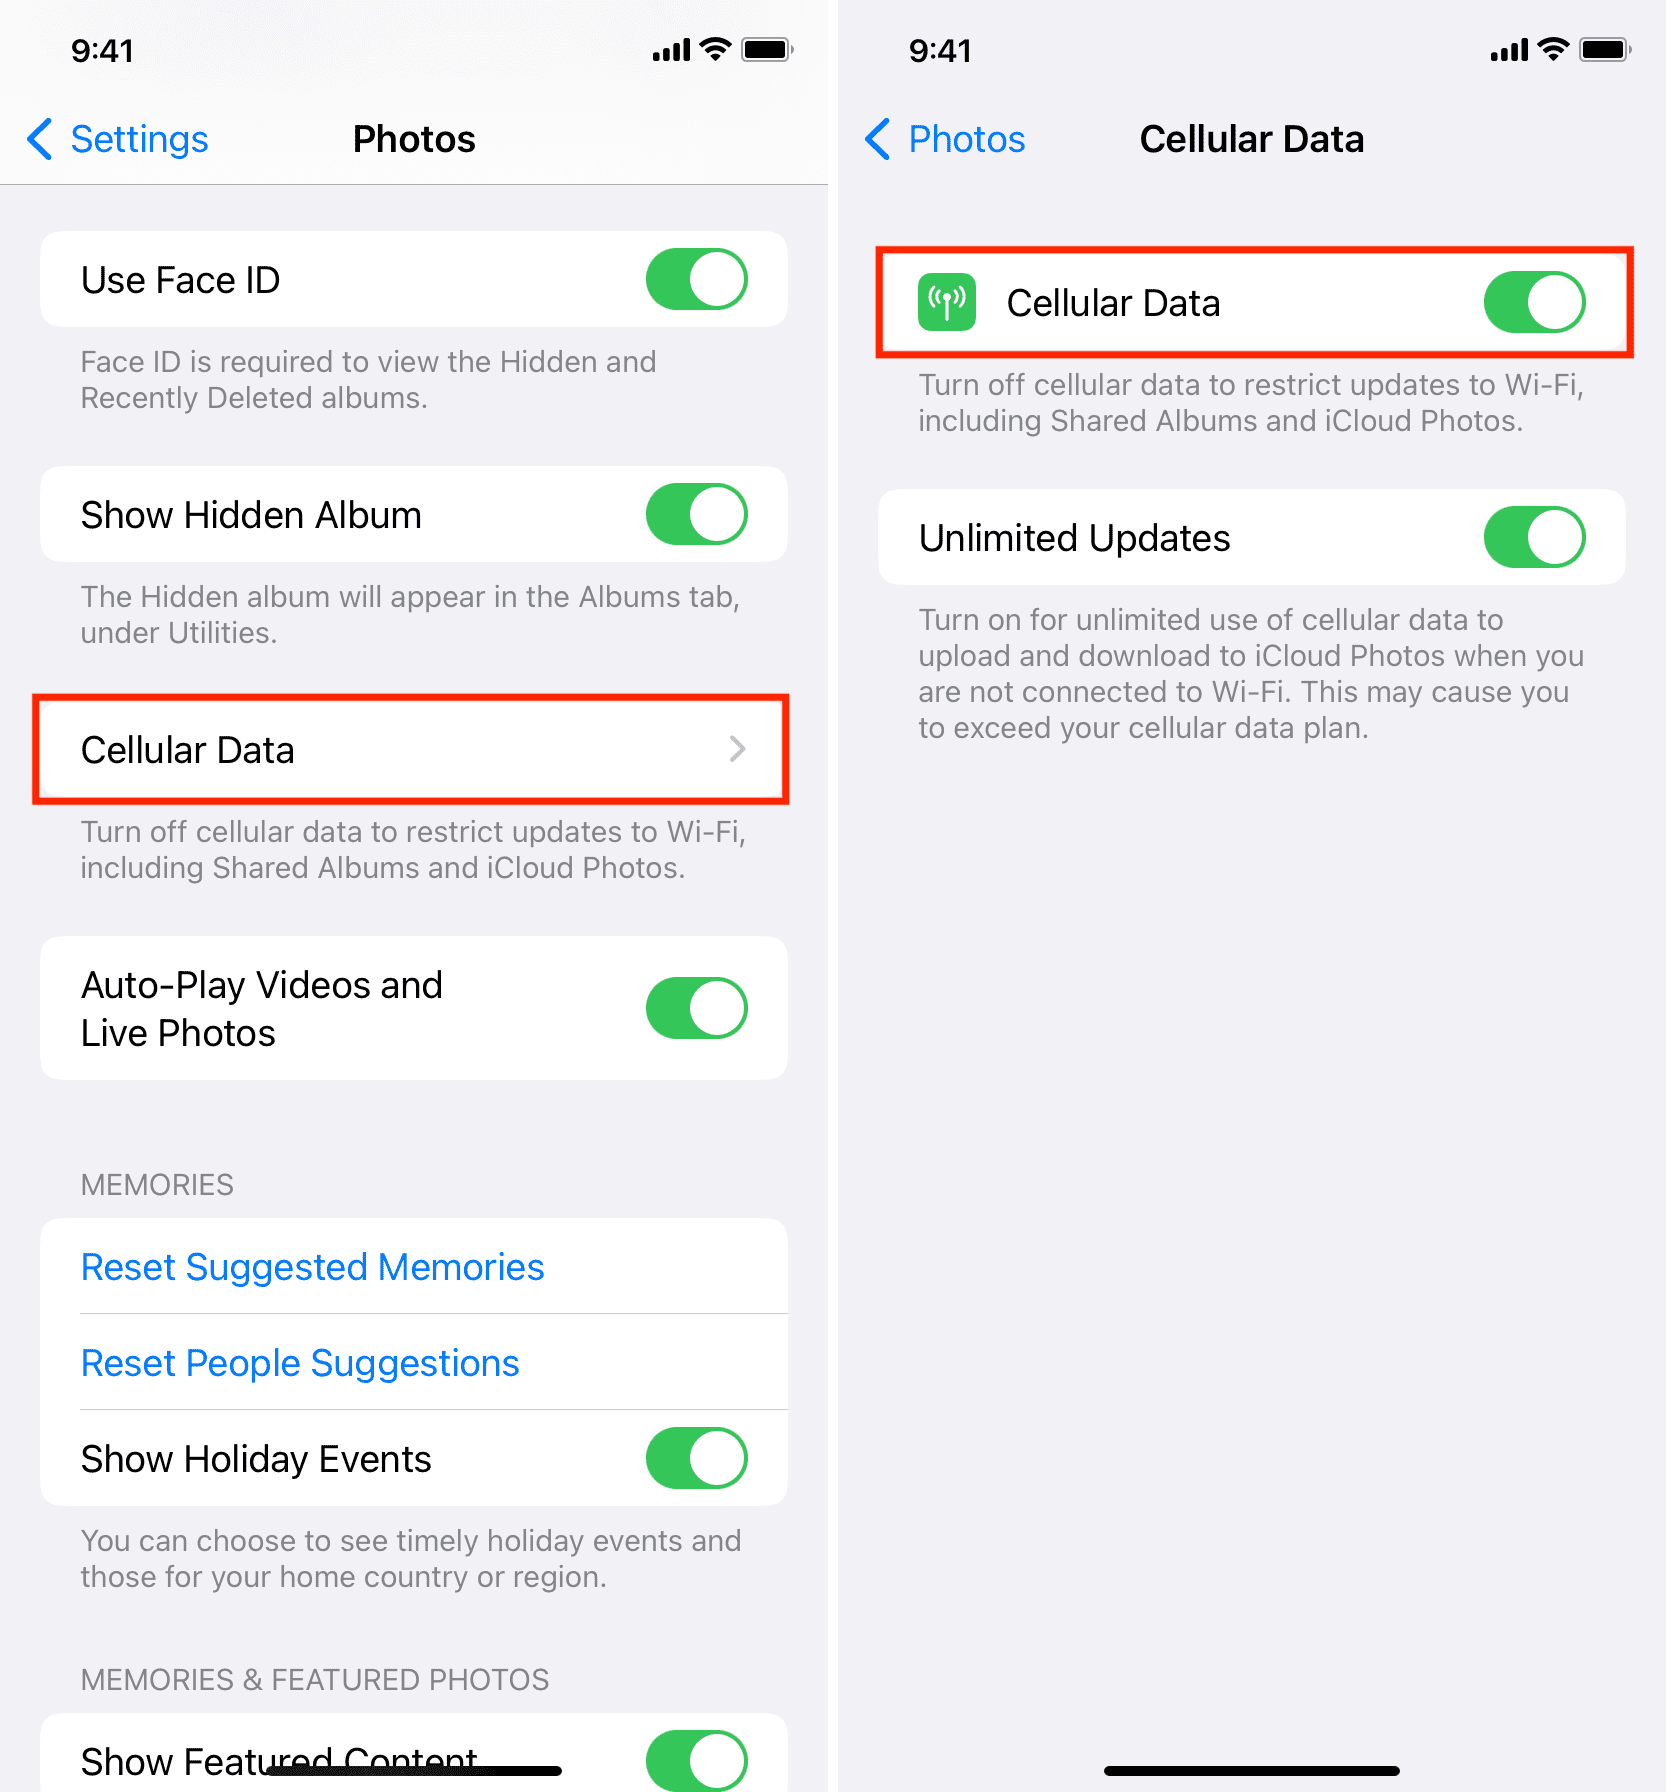 Enable iCloud Photos to work on cellular data on iPhone